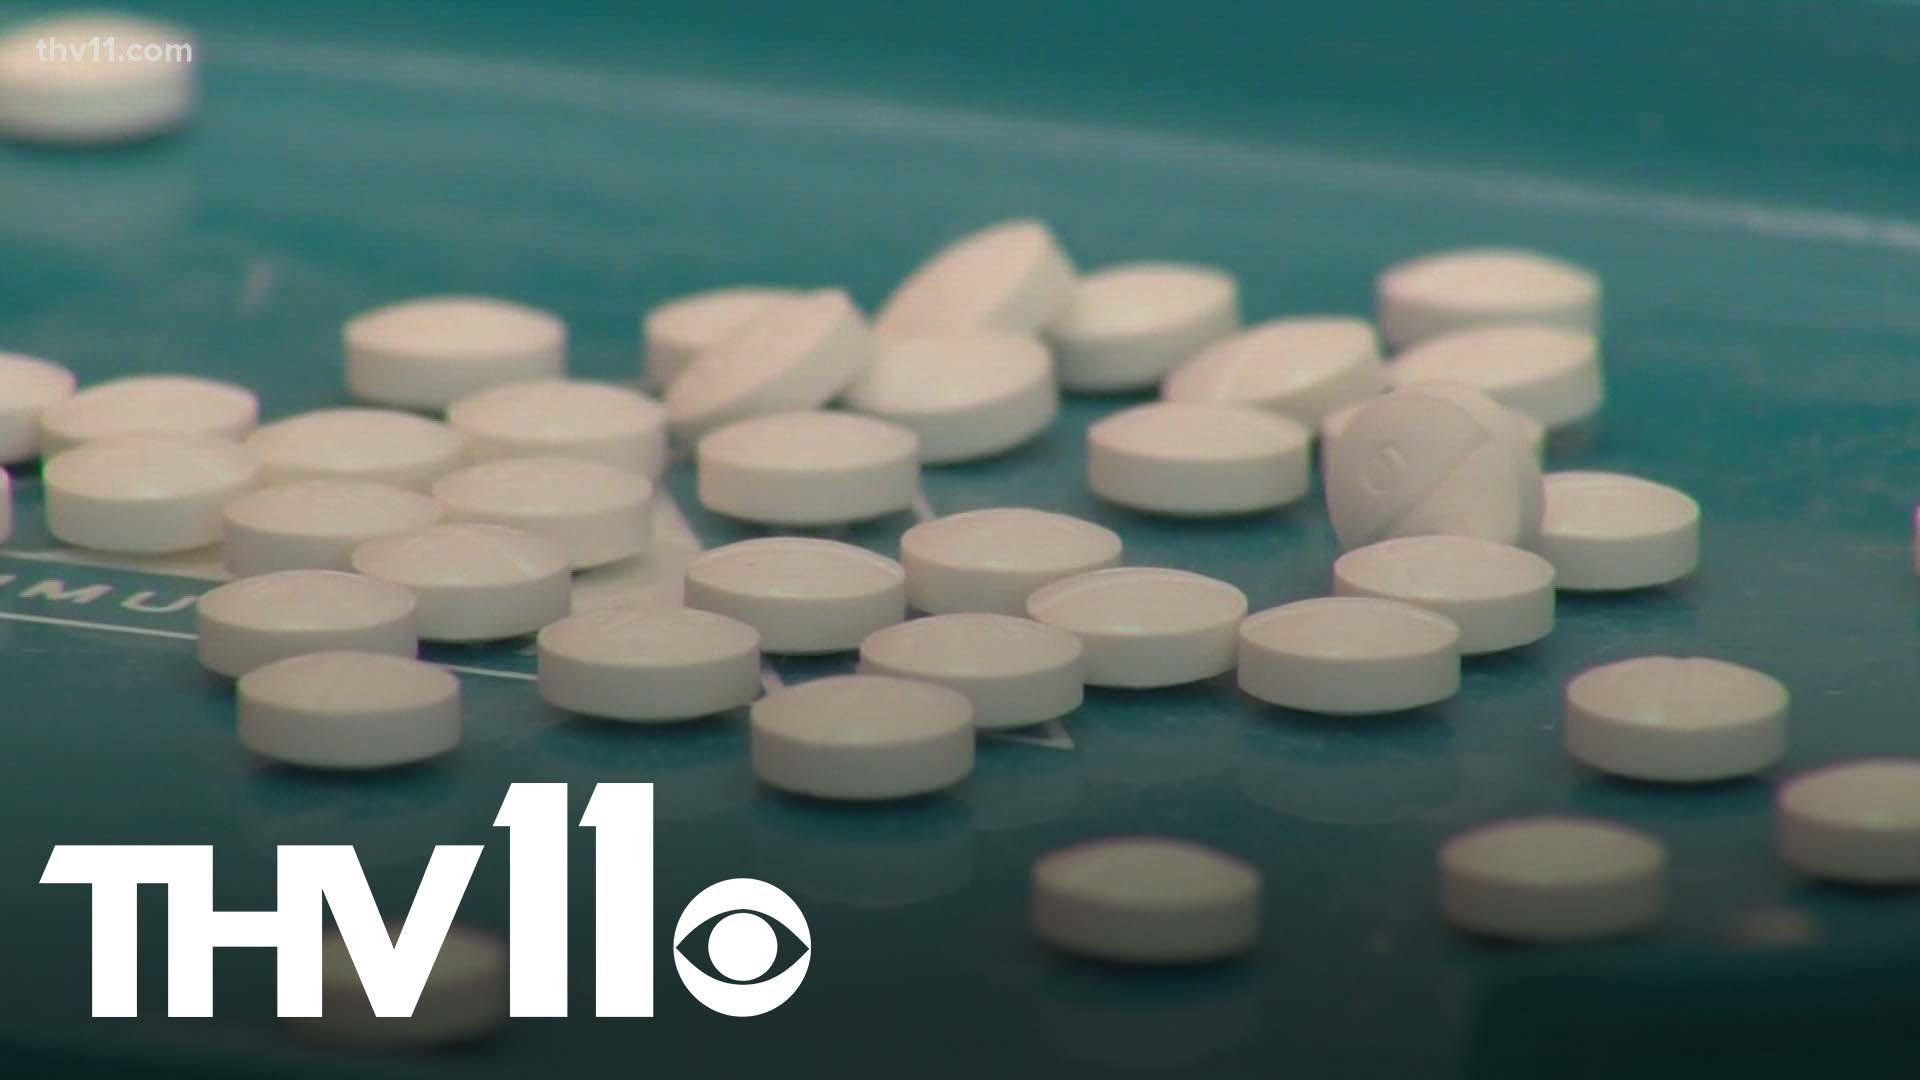 The U.S. Drug Administration said that they're seeing a nationwide spike in overdoses. Arkansas officials are now on alert in case the spike hits the state.